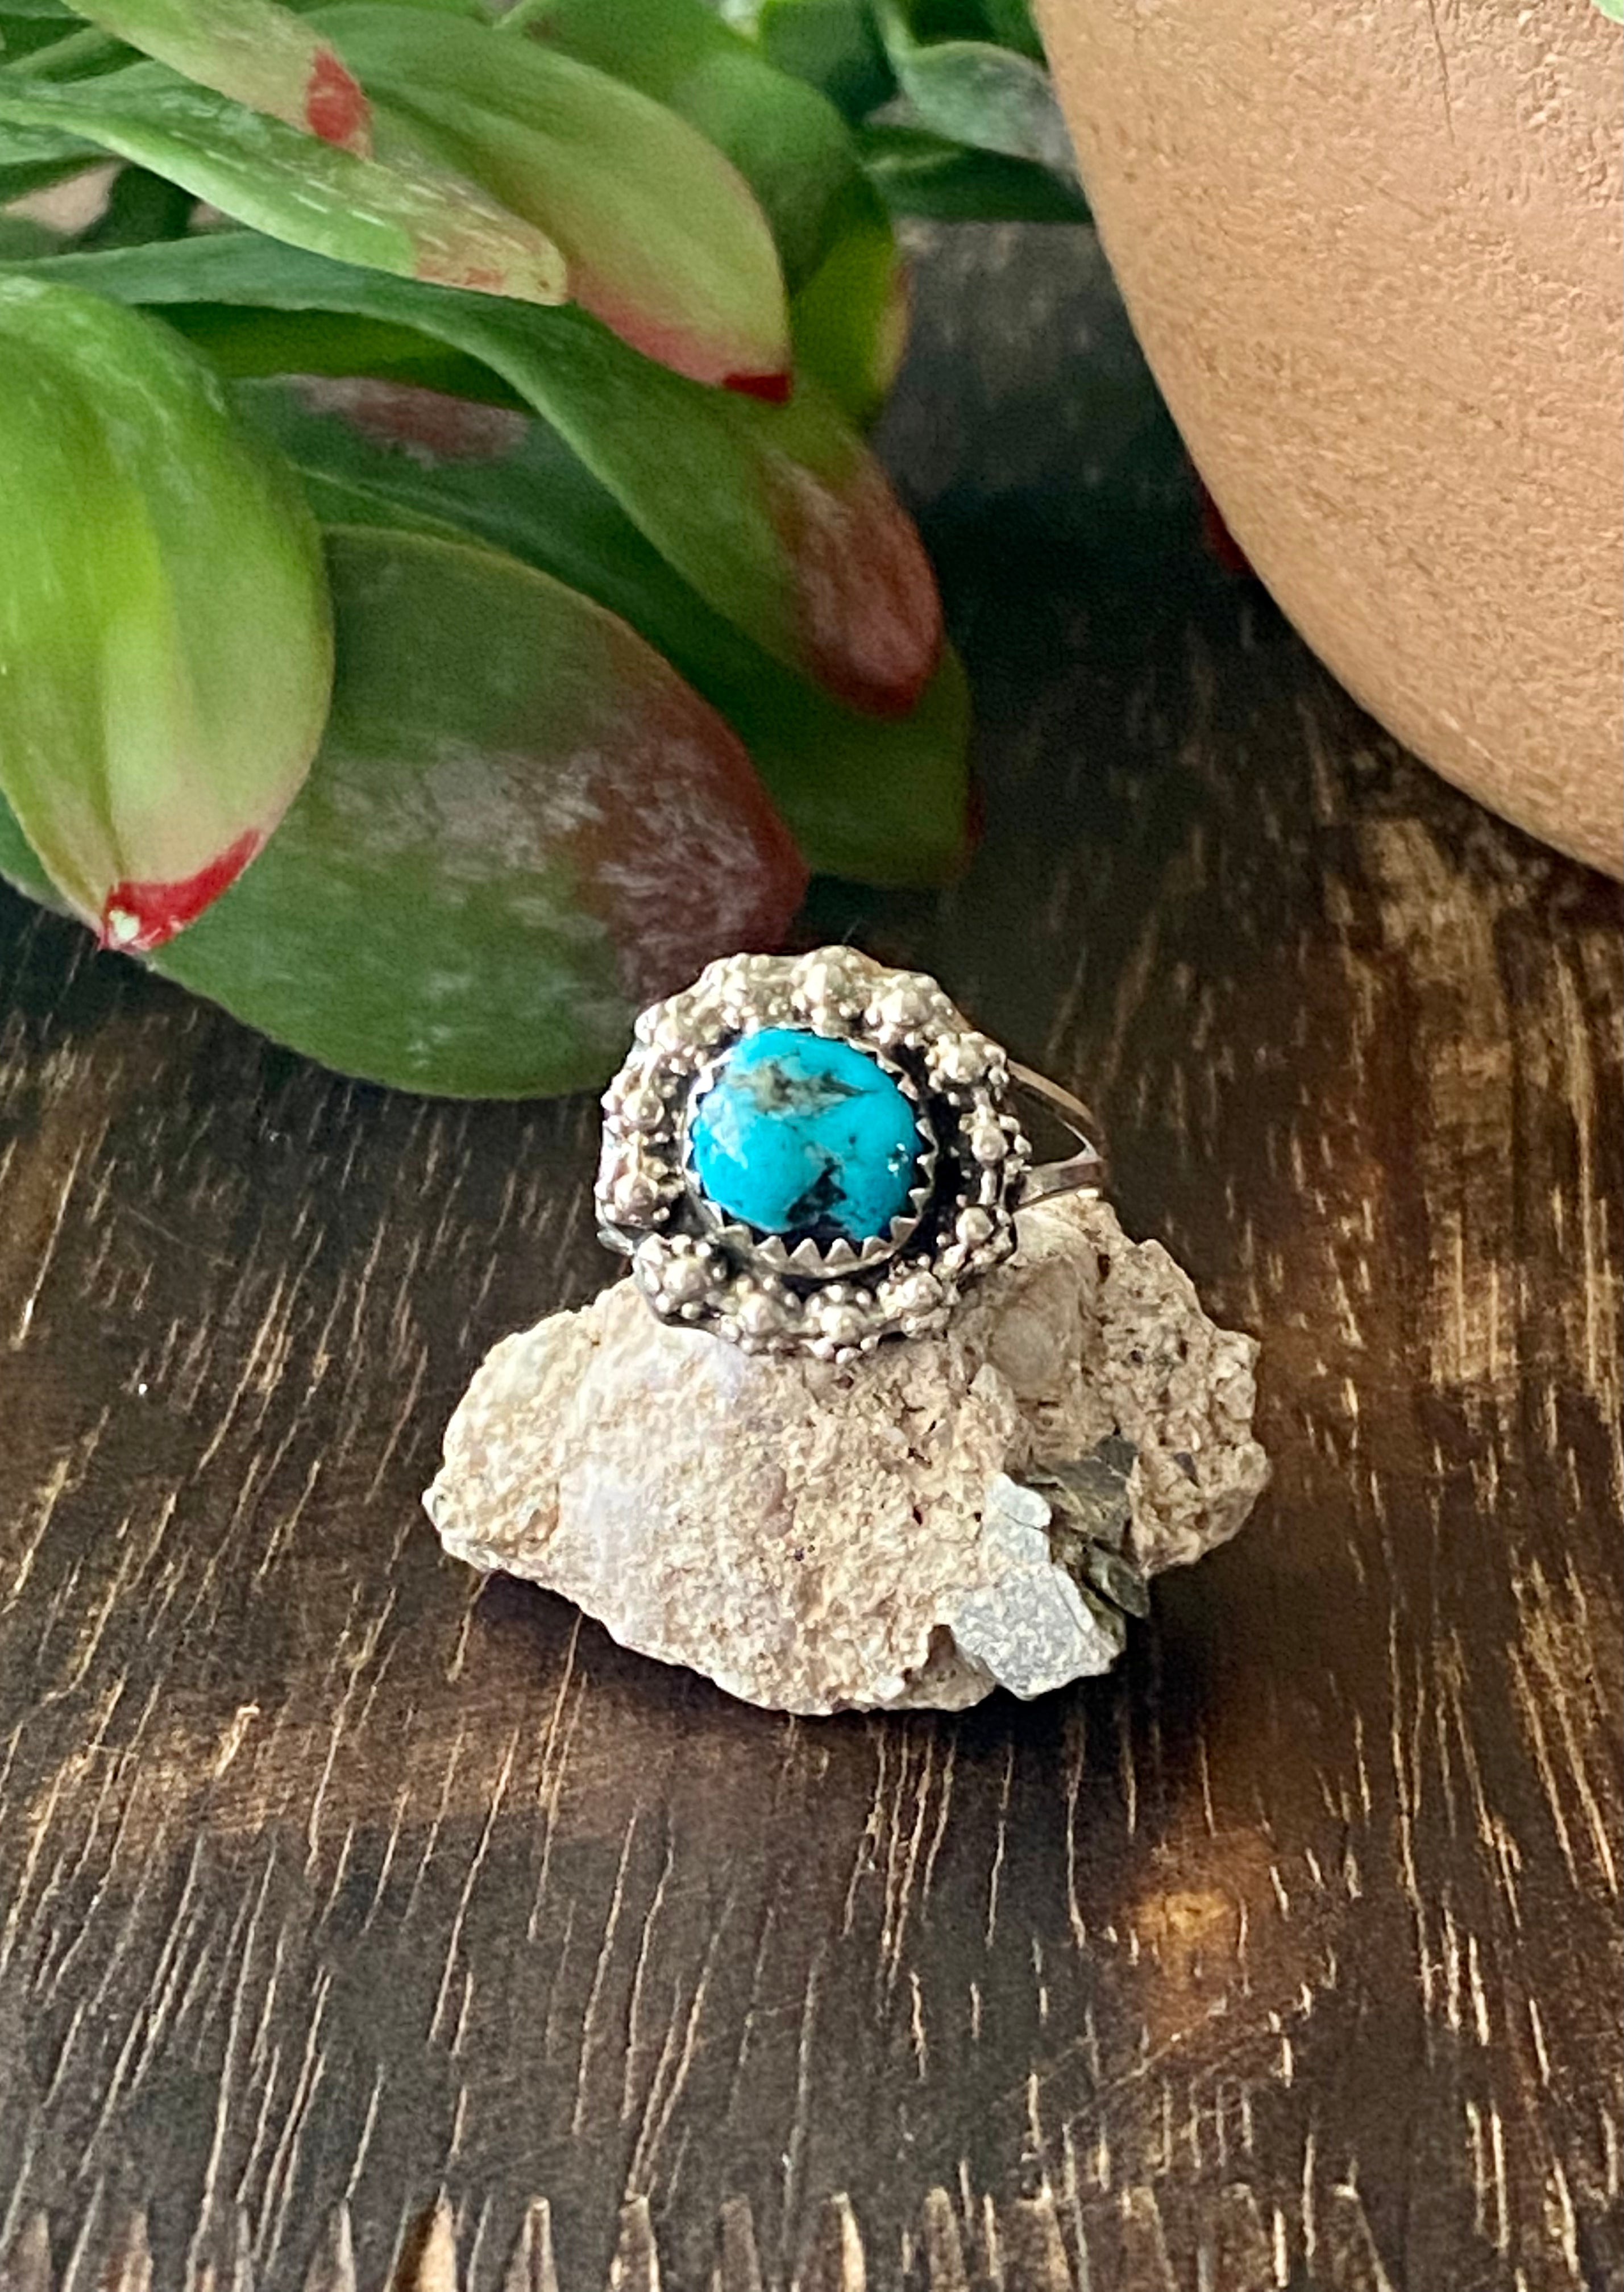 Navajo Made Kingman Turquoise & Sterling Silver Ring Size 5.25